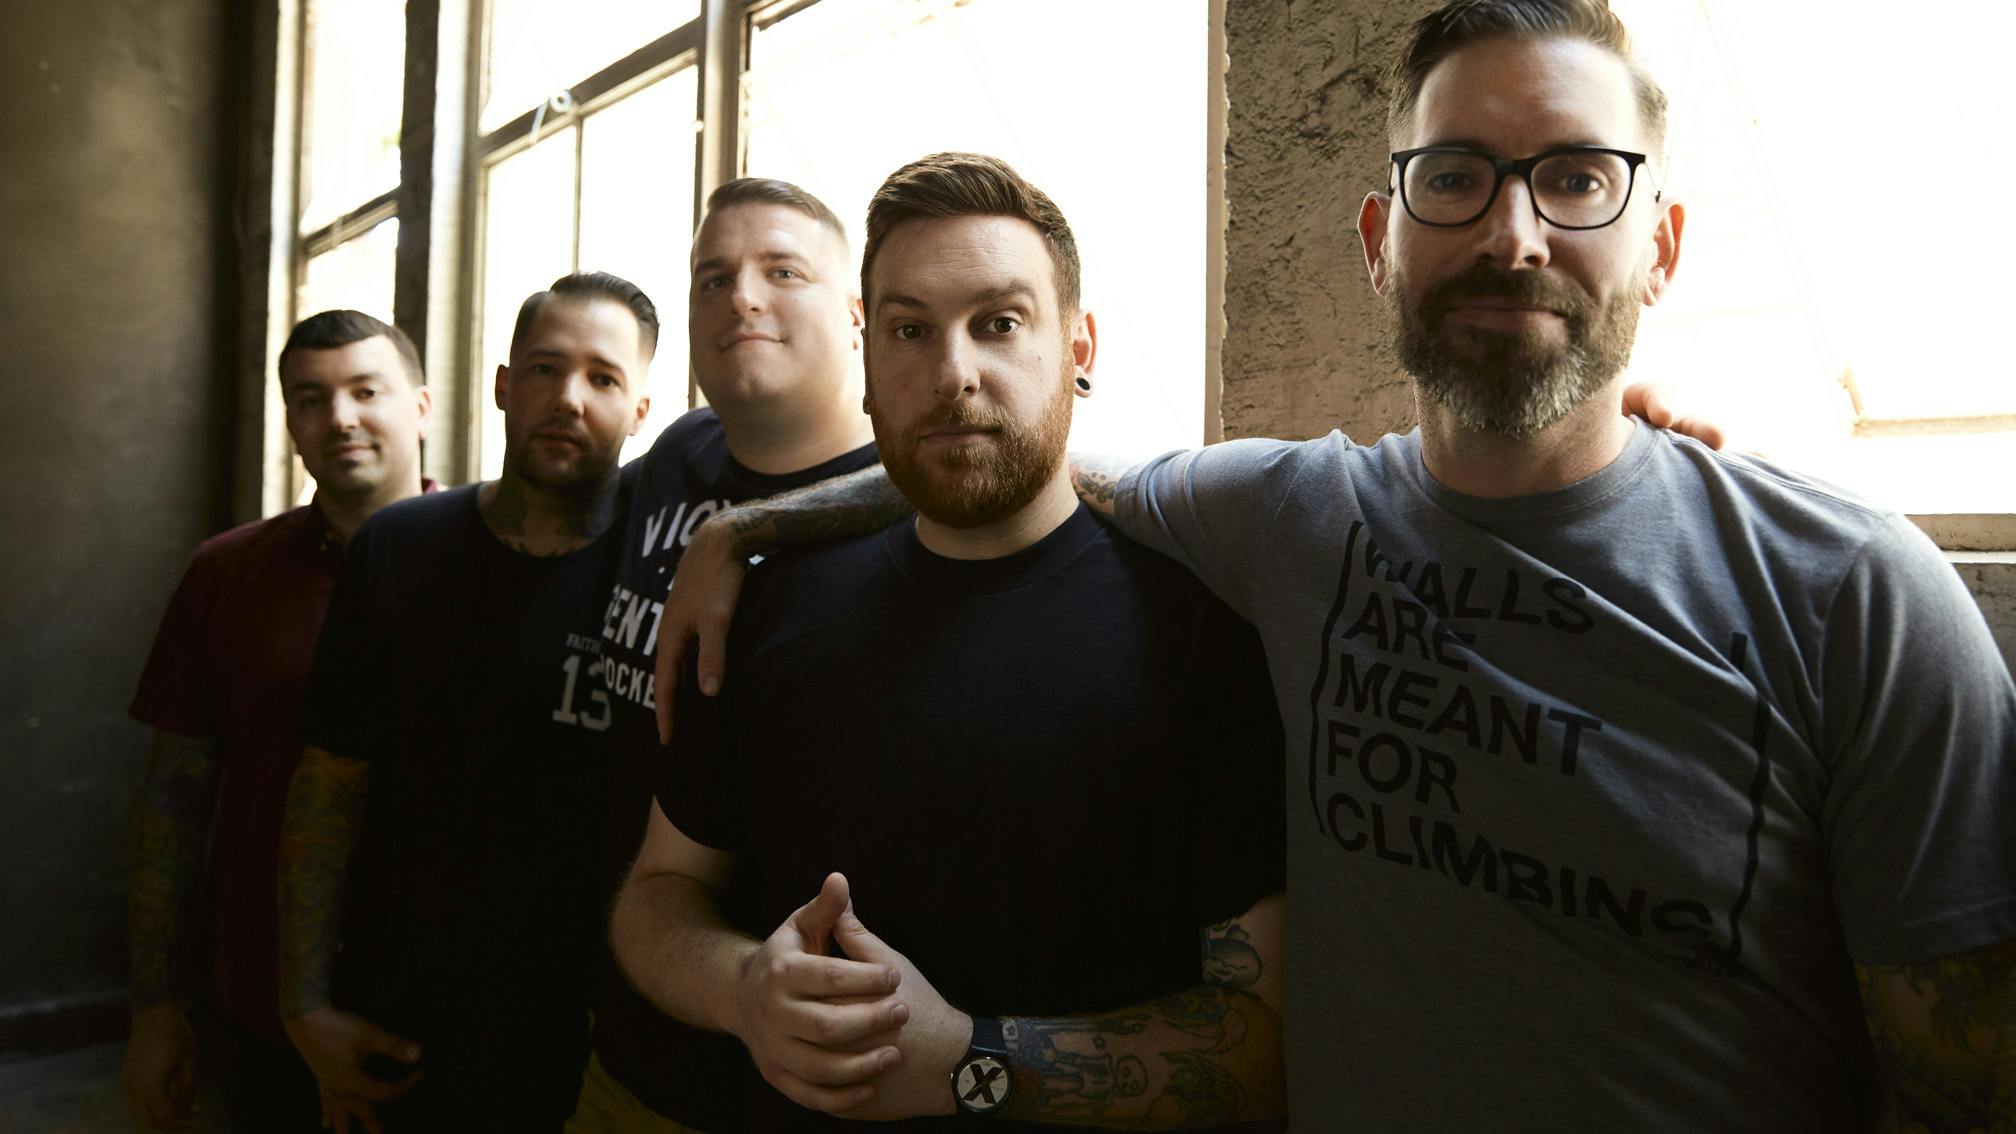 The Ghost Inside's New Album Is So Much More Than Their 'Accident Record'